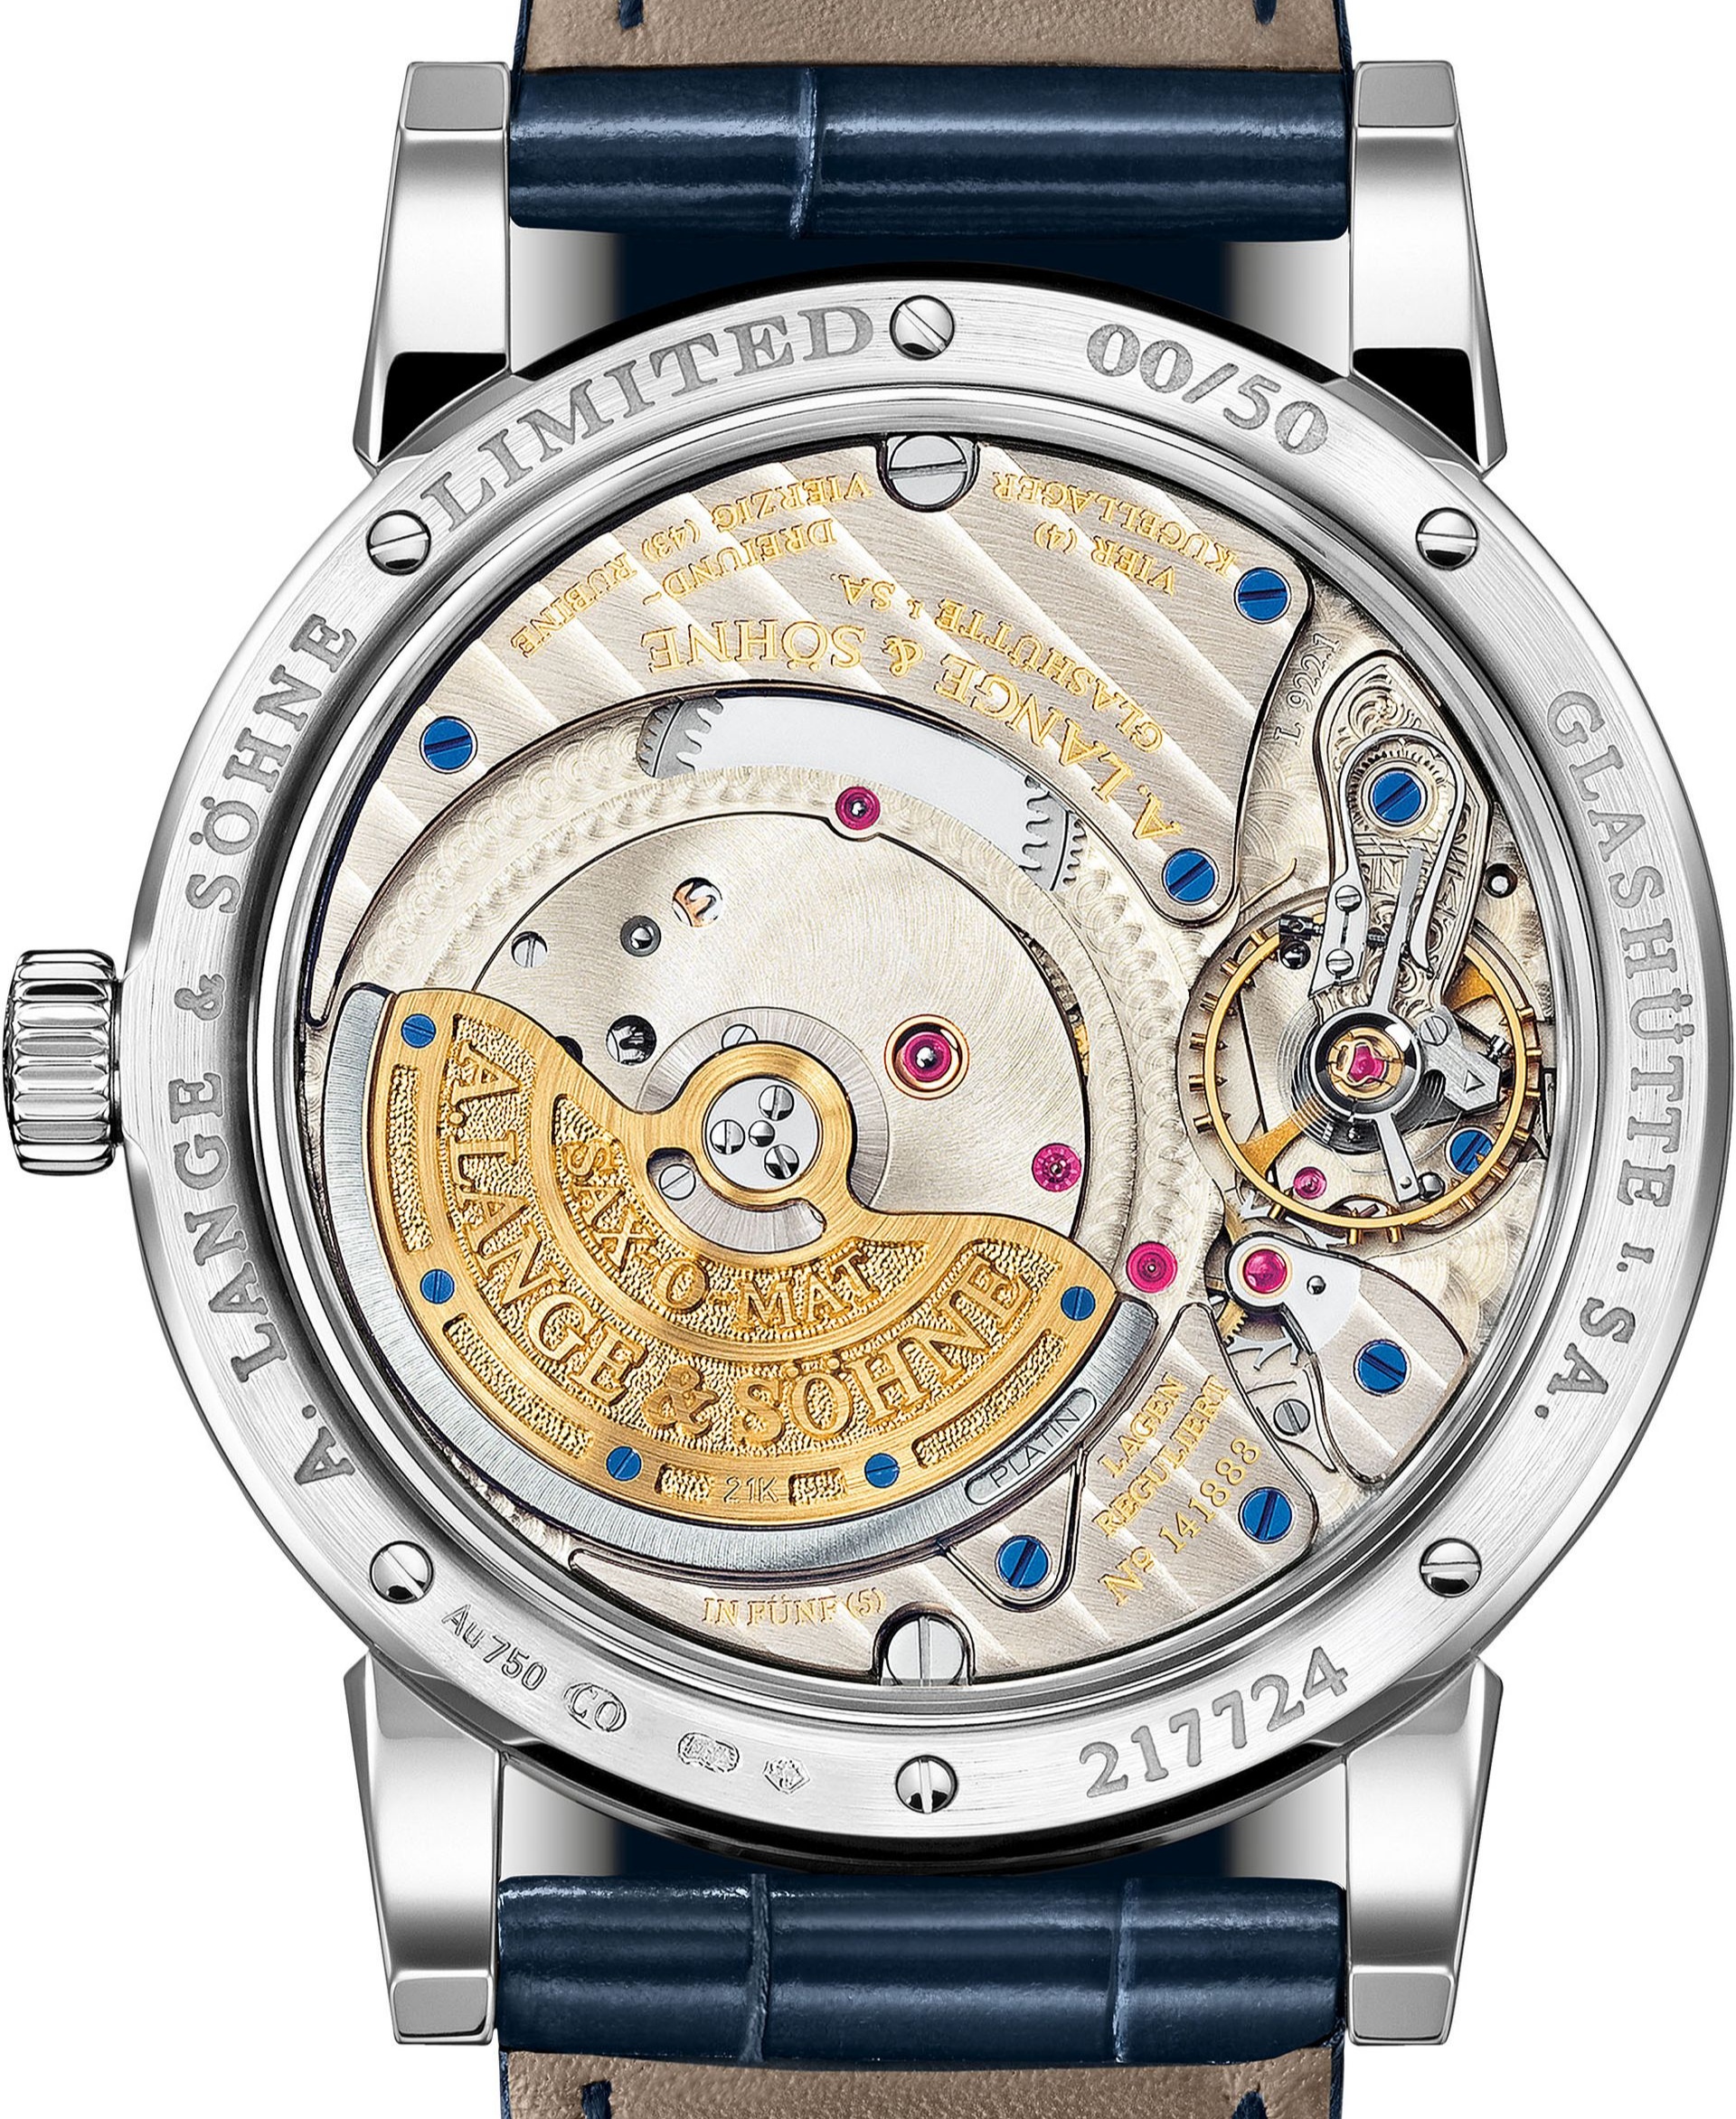 Perrelet First Class 42.50 mm Watch in Skeleton Dial